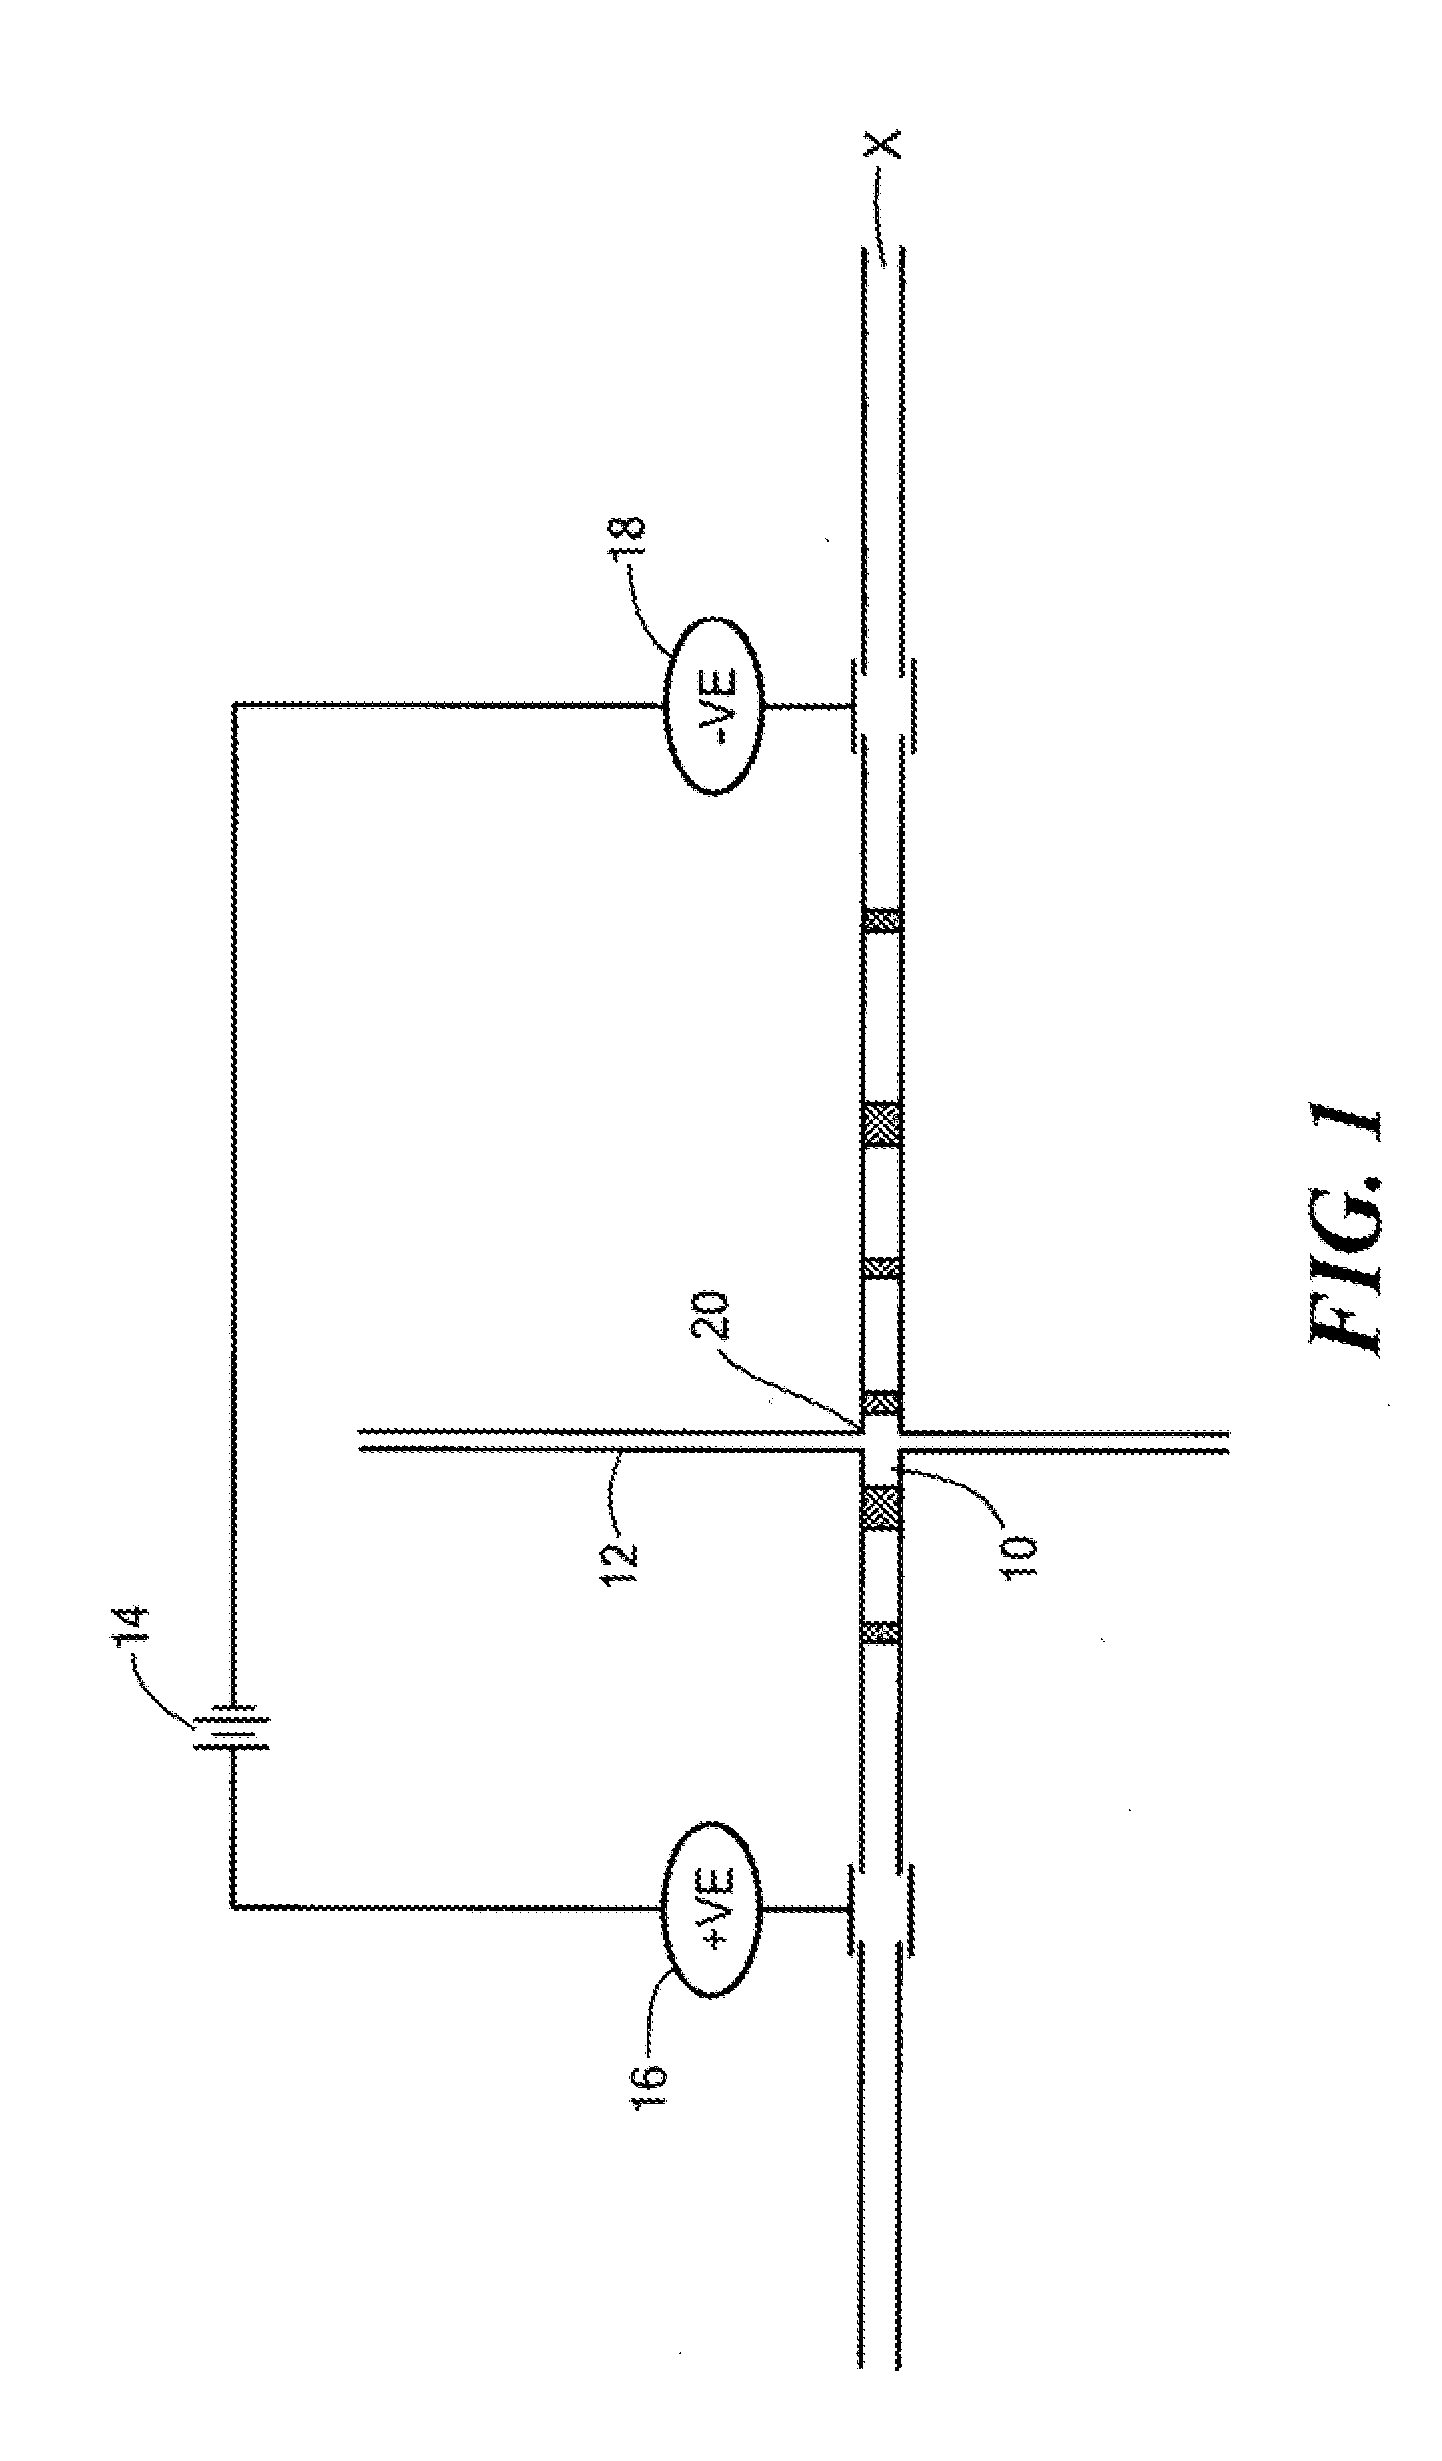 Method and apparatus for precise seletion and extraction of a focused component in isoelectric focusing performed in micro-channels